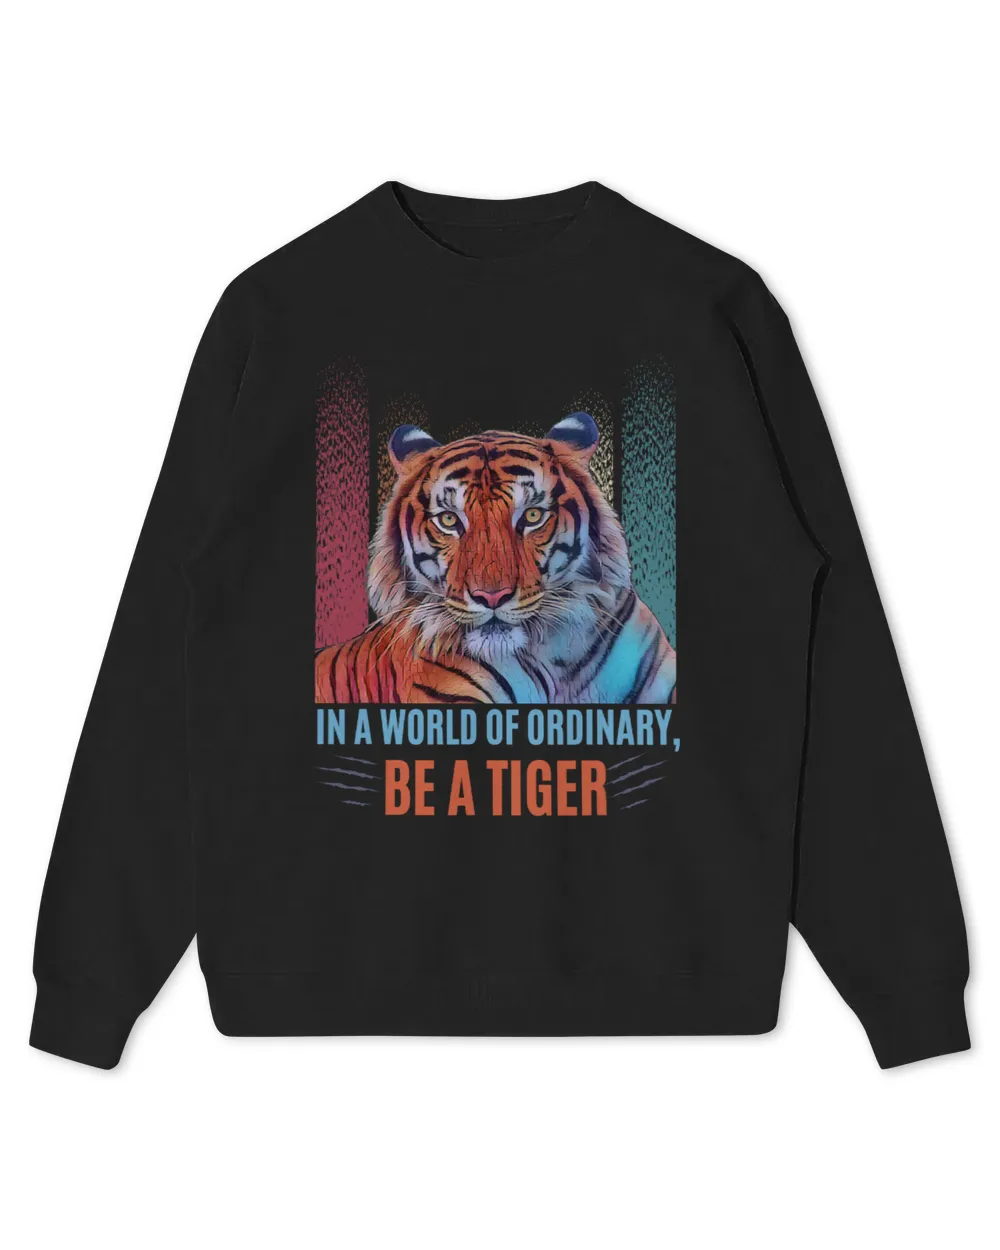 Tiger Gift In A World of Ordinary Be a TIGER Motivational quote Men